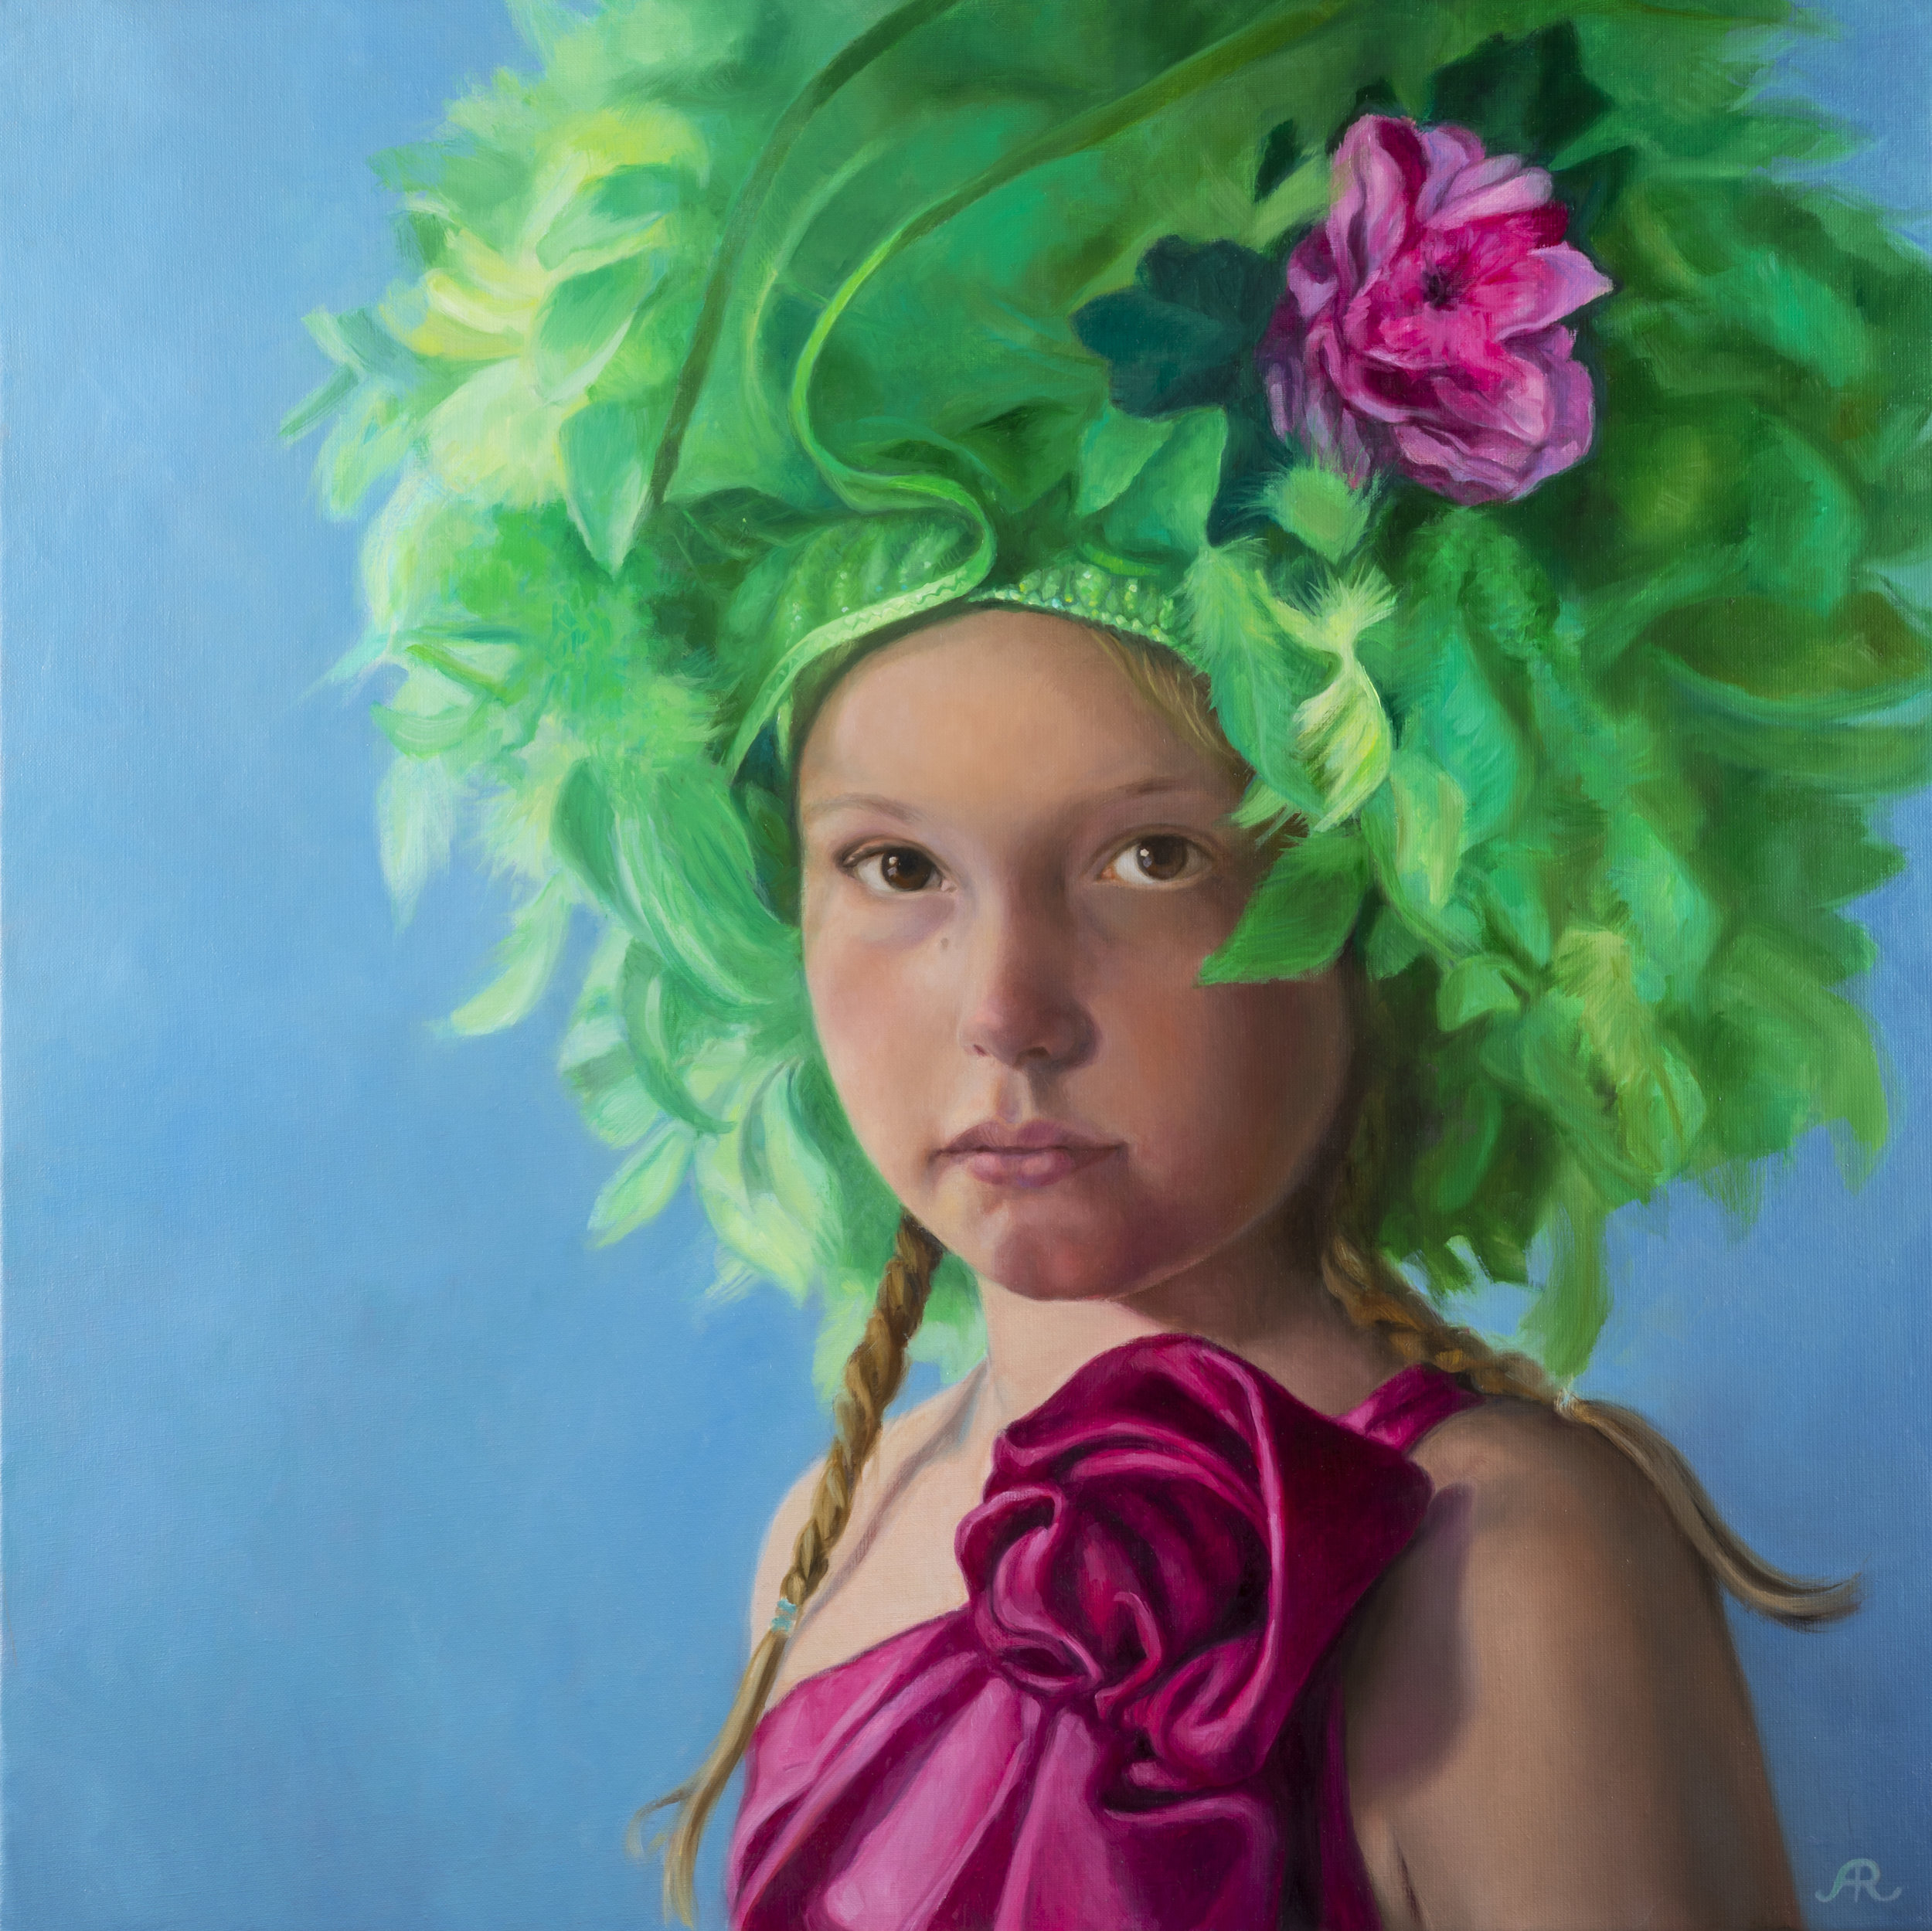  Astrid Ritmeester │ Make Believe │ Oil on Canvas │ 32 inches square or 80 cm square 